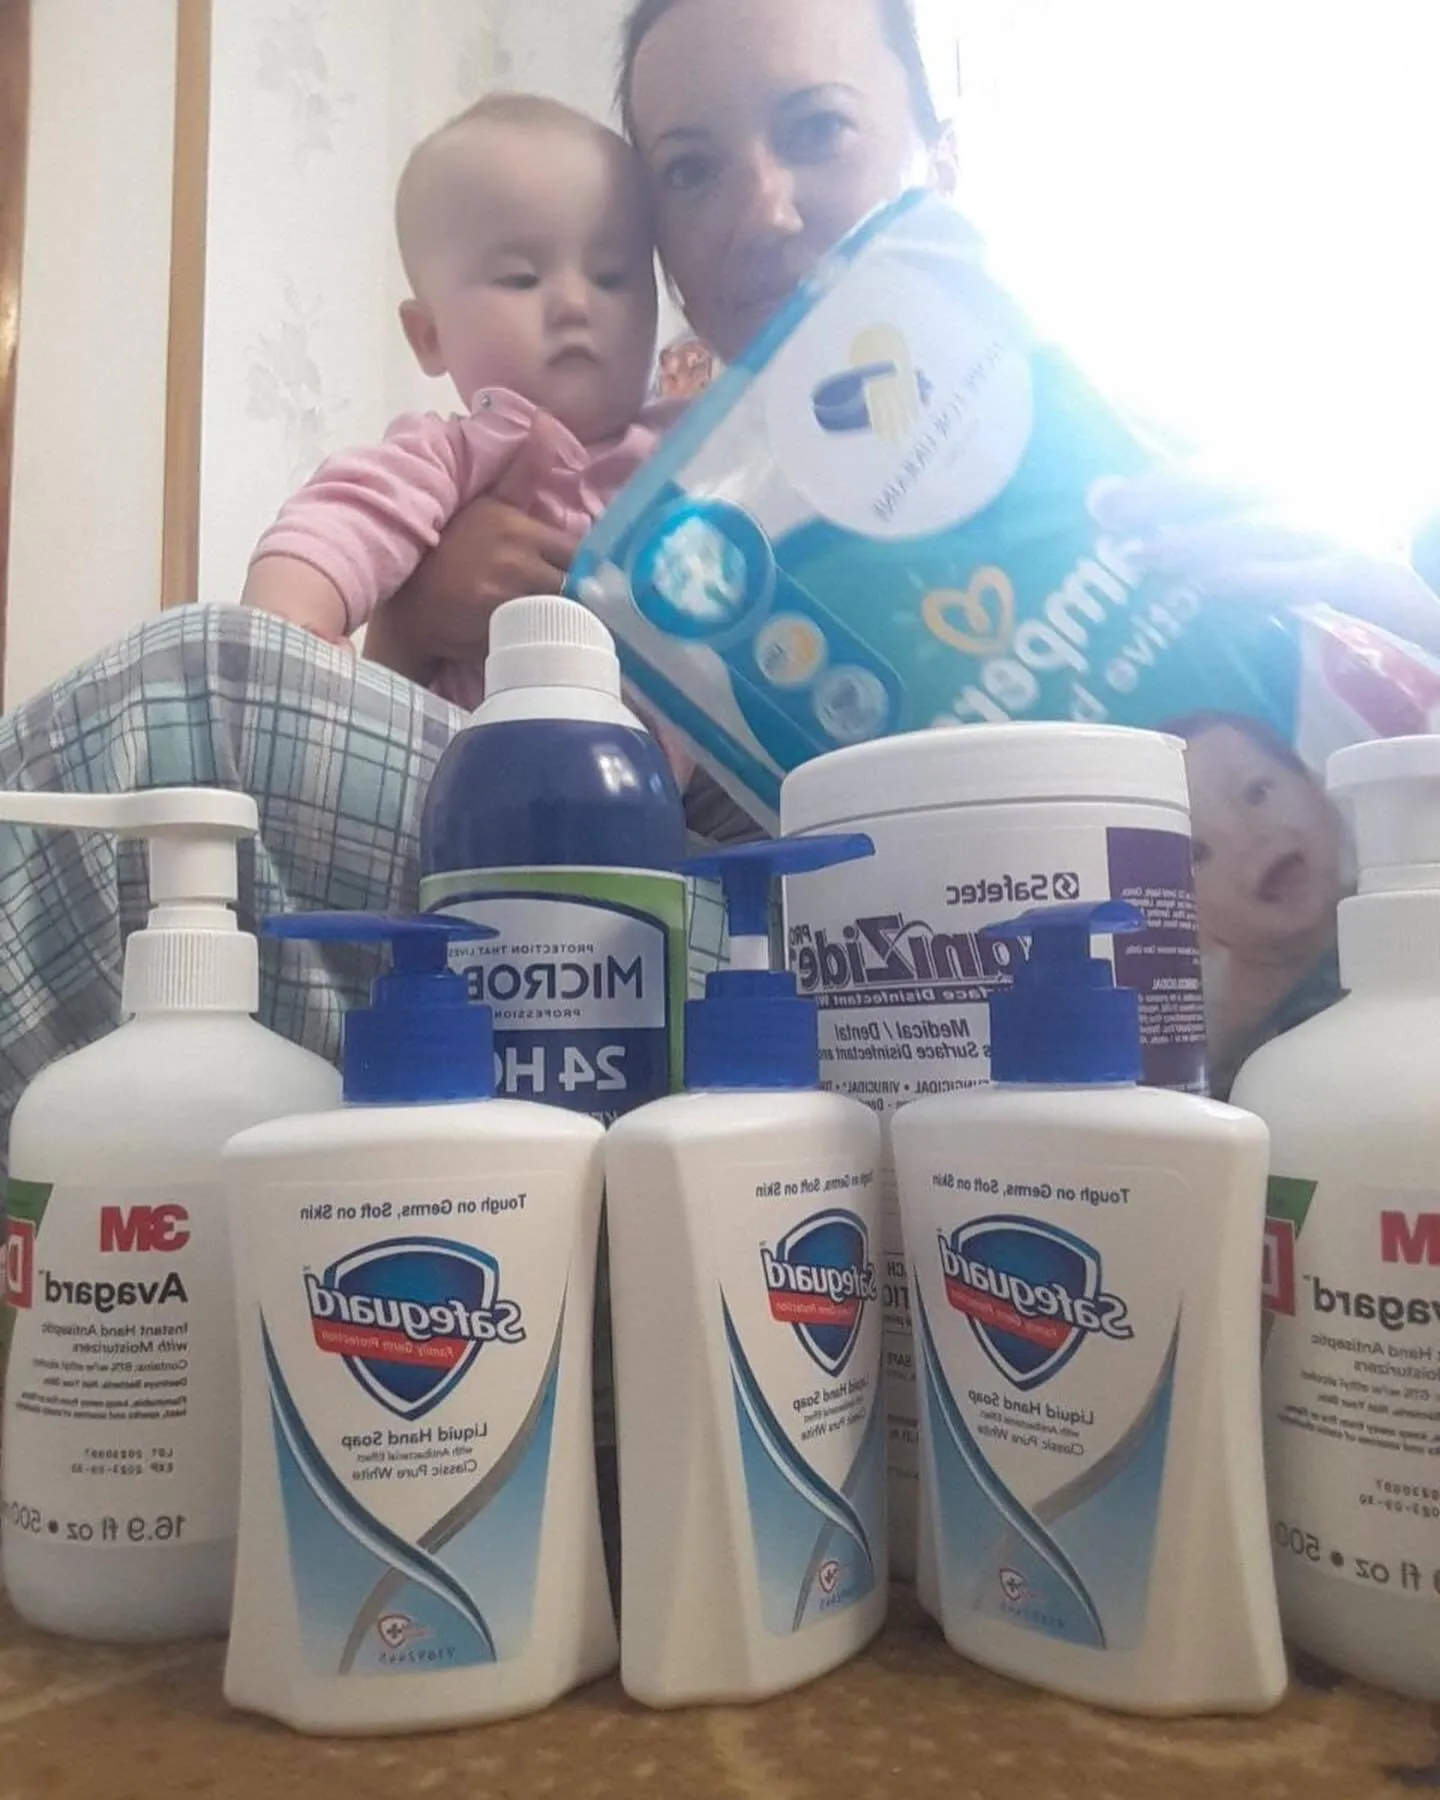 a woman holding a baby in front of bottles of mouthwash.